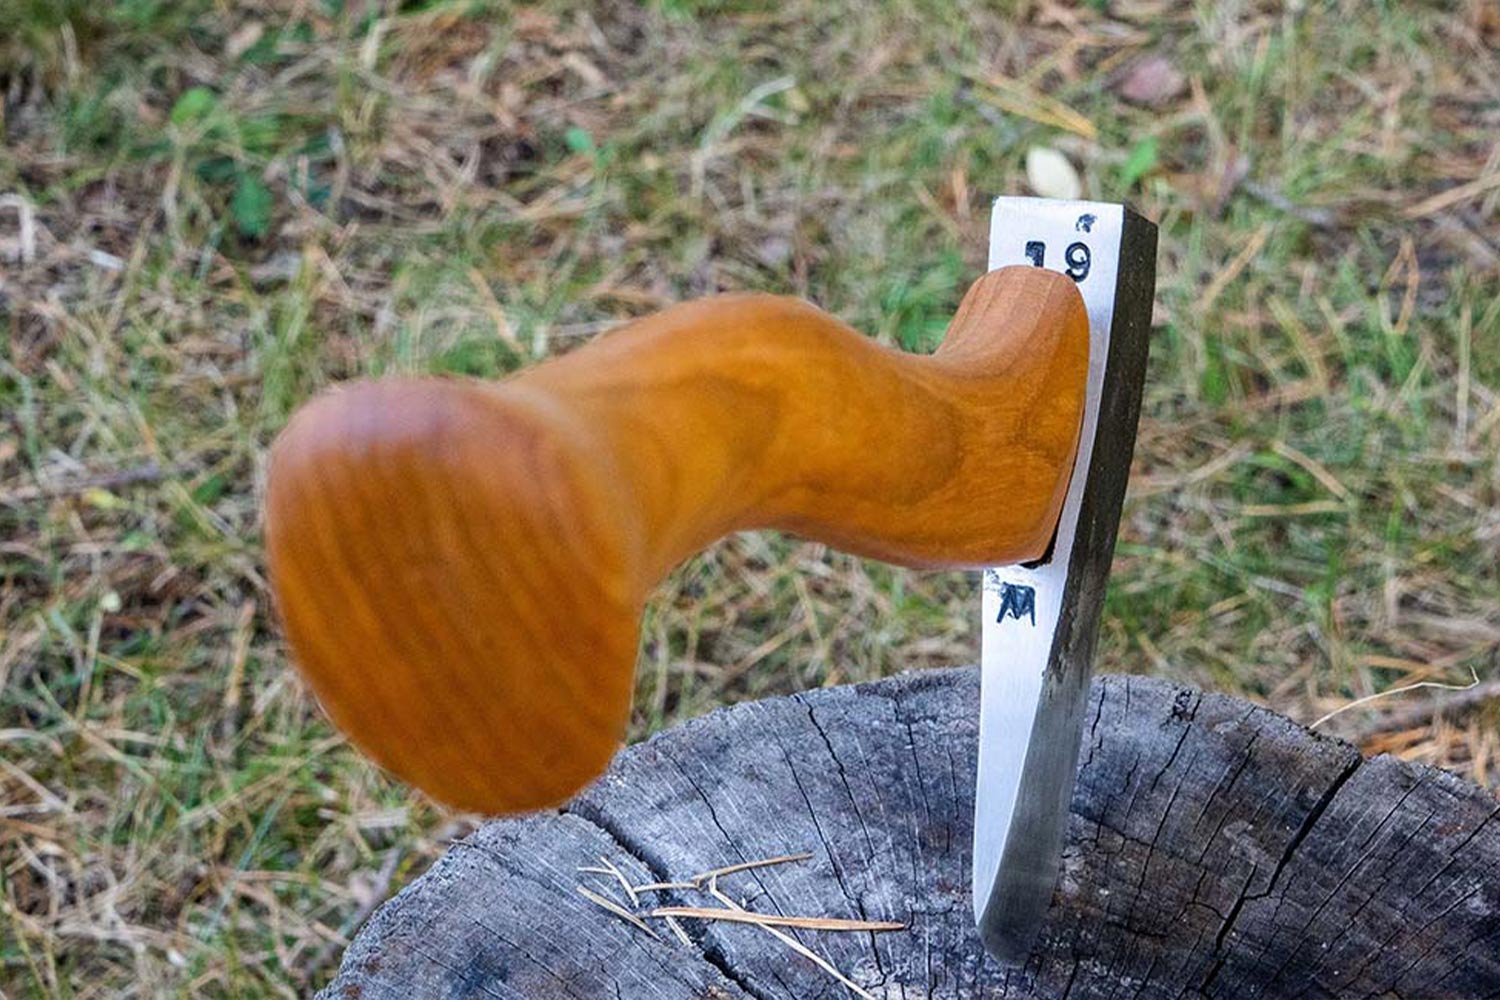 Looking down haft of a Brant & Cochran axe, one of our favorite American-made products